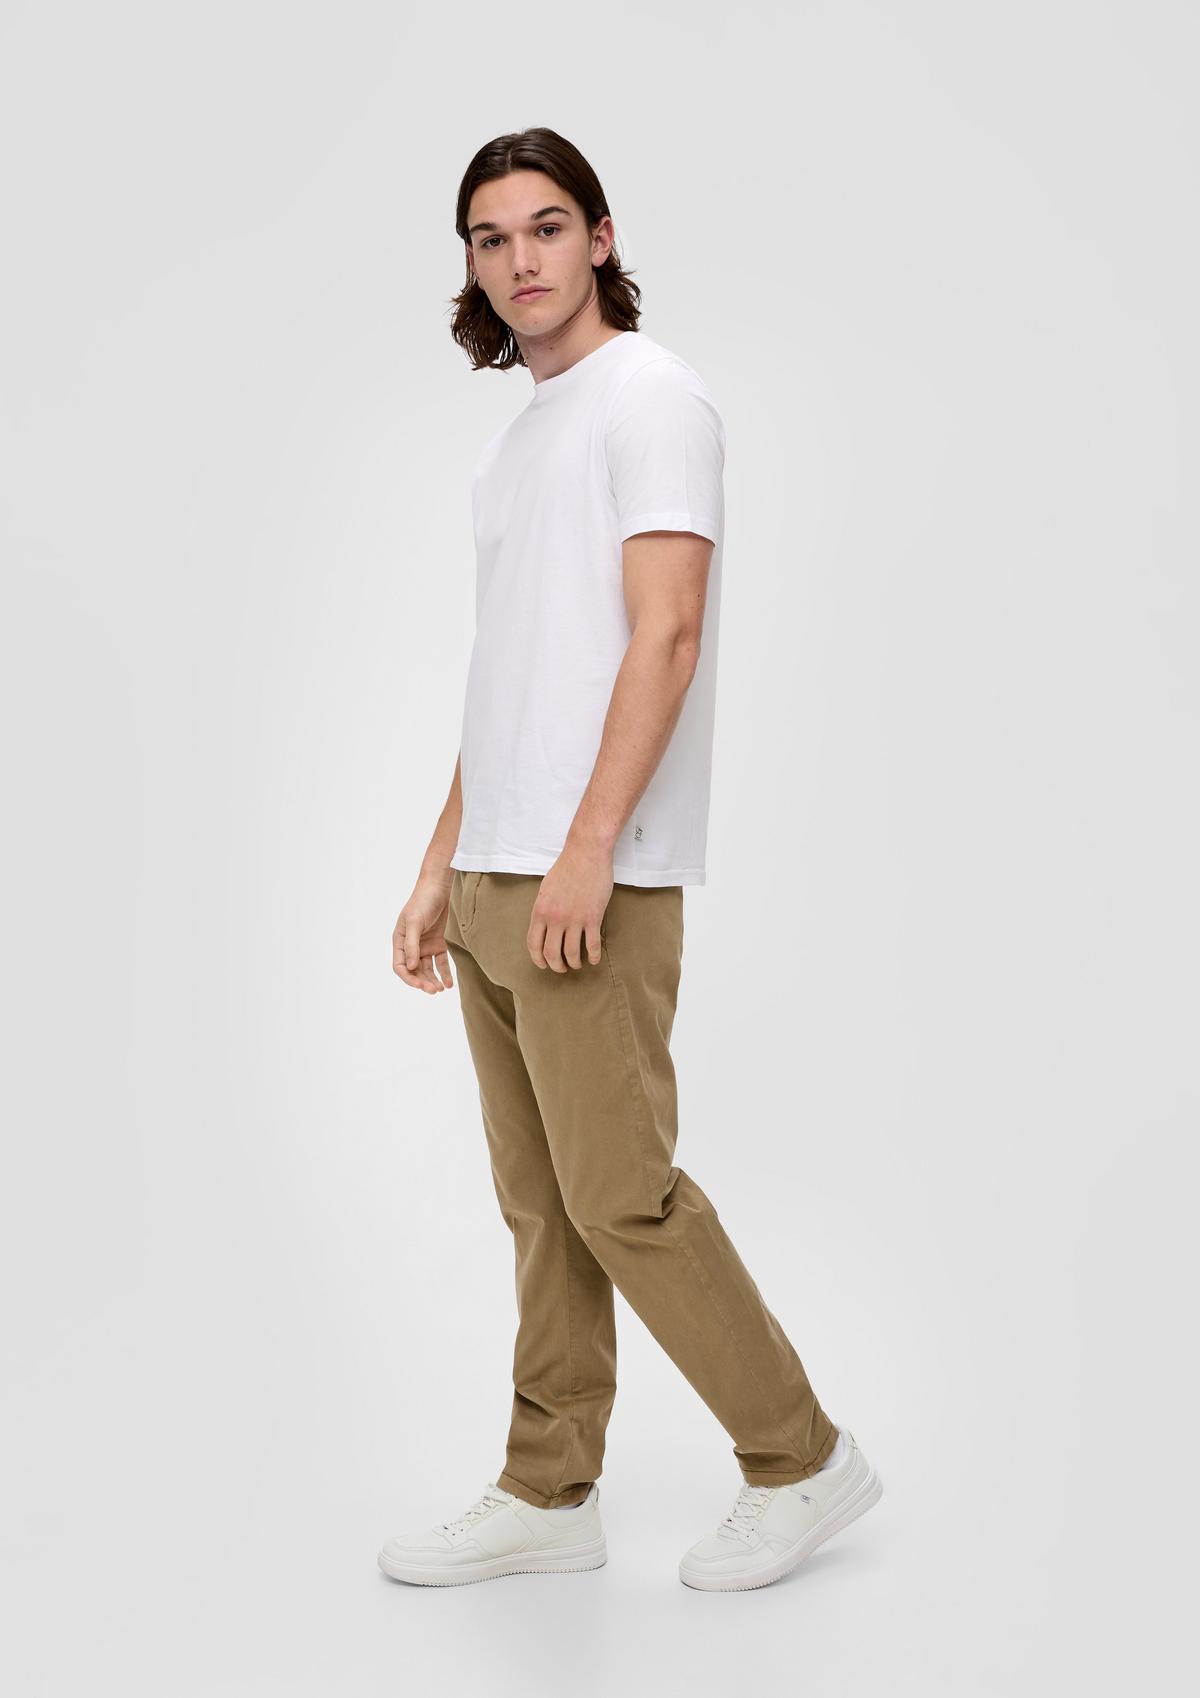 Twill trousers with a slim leg